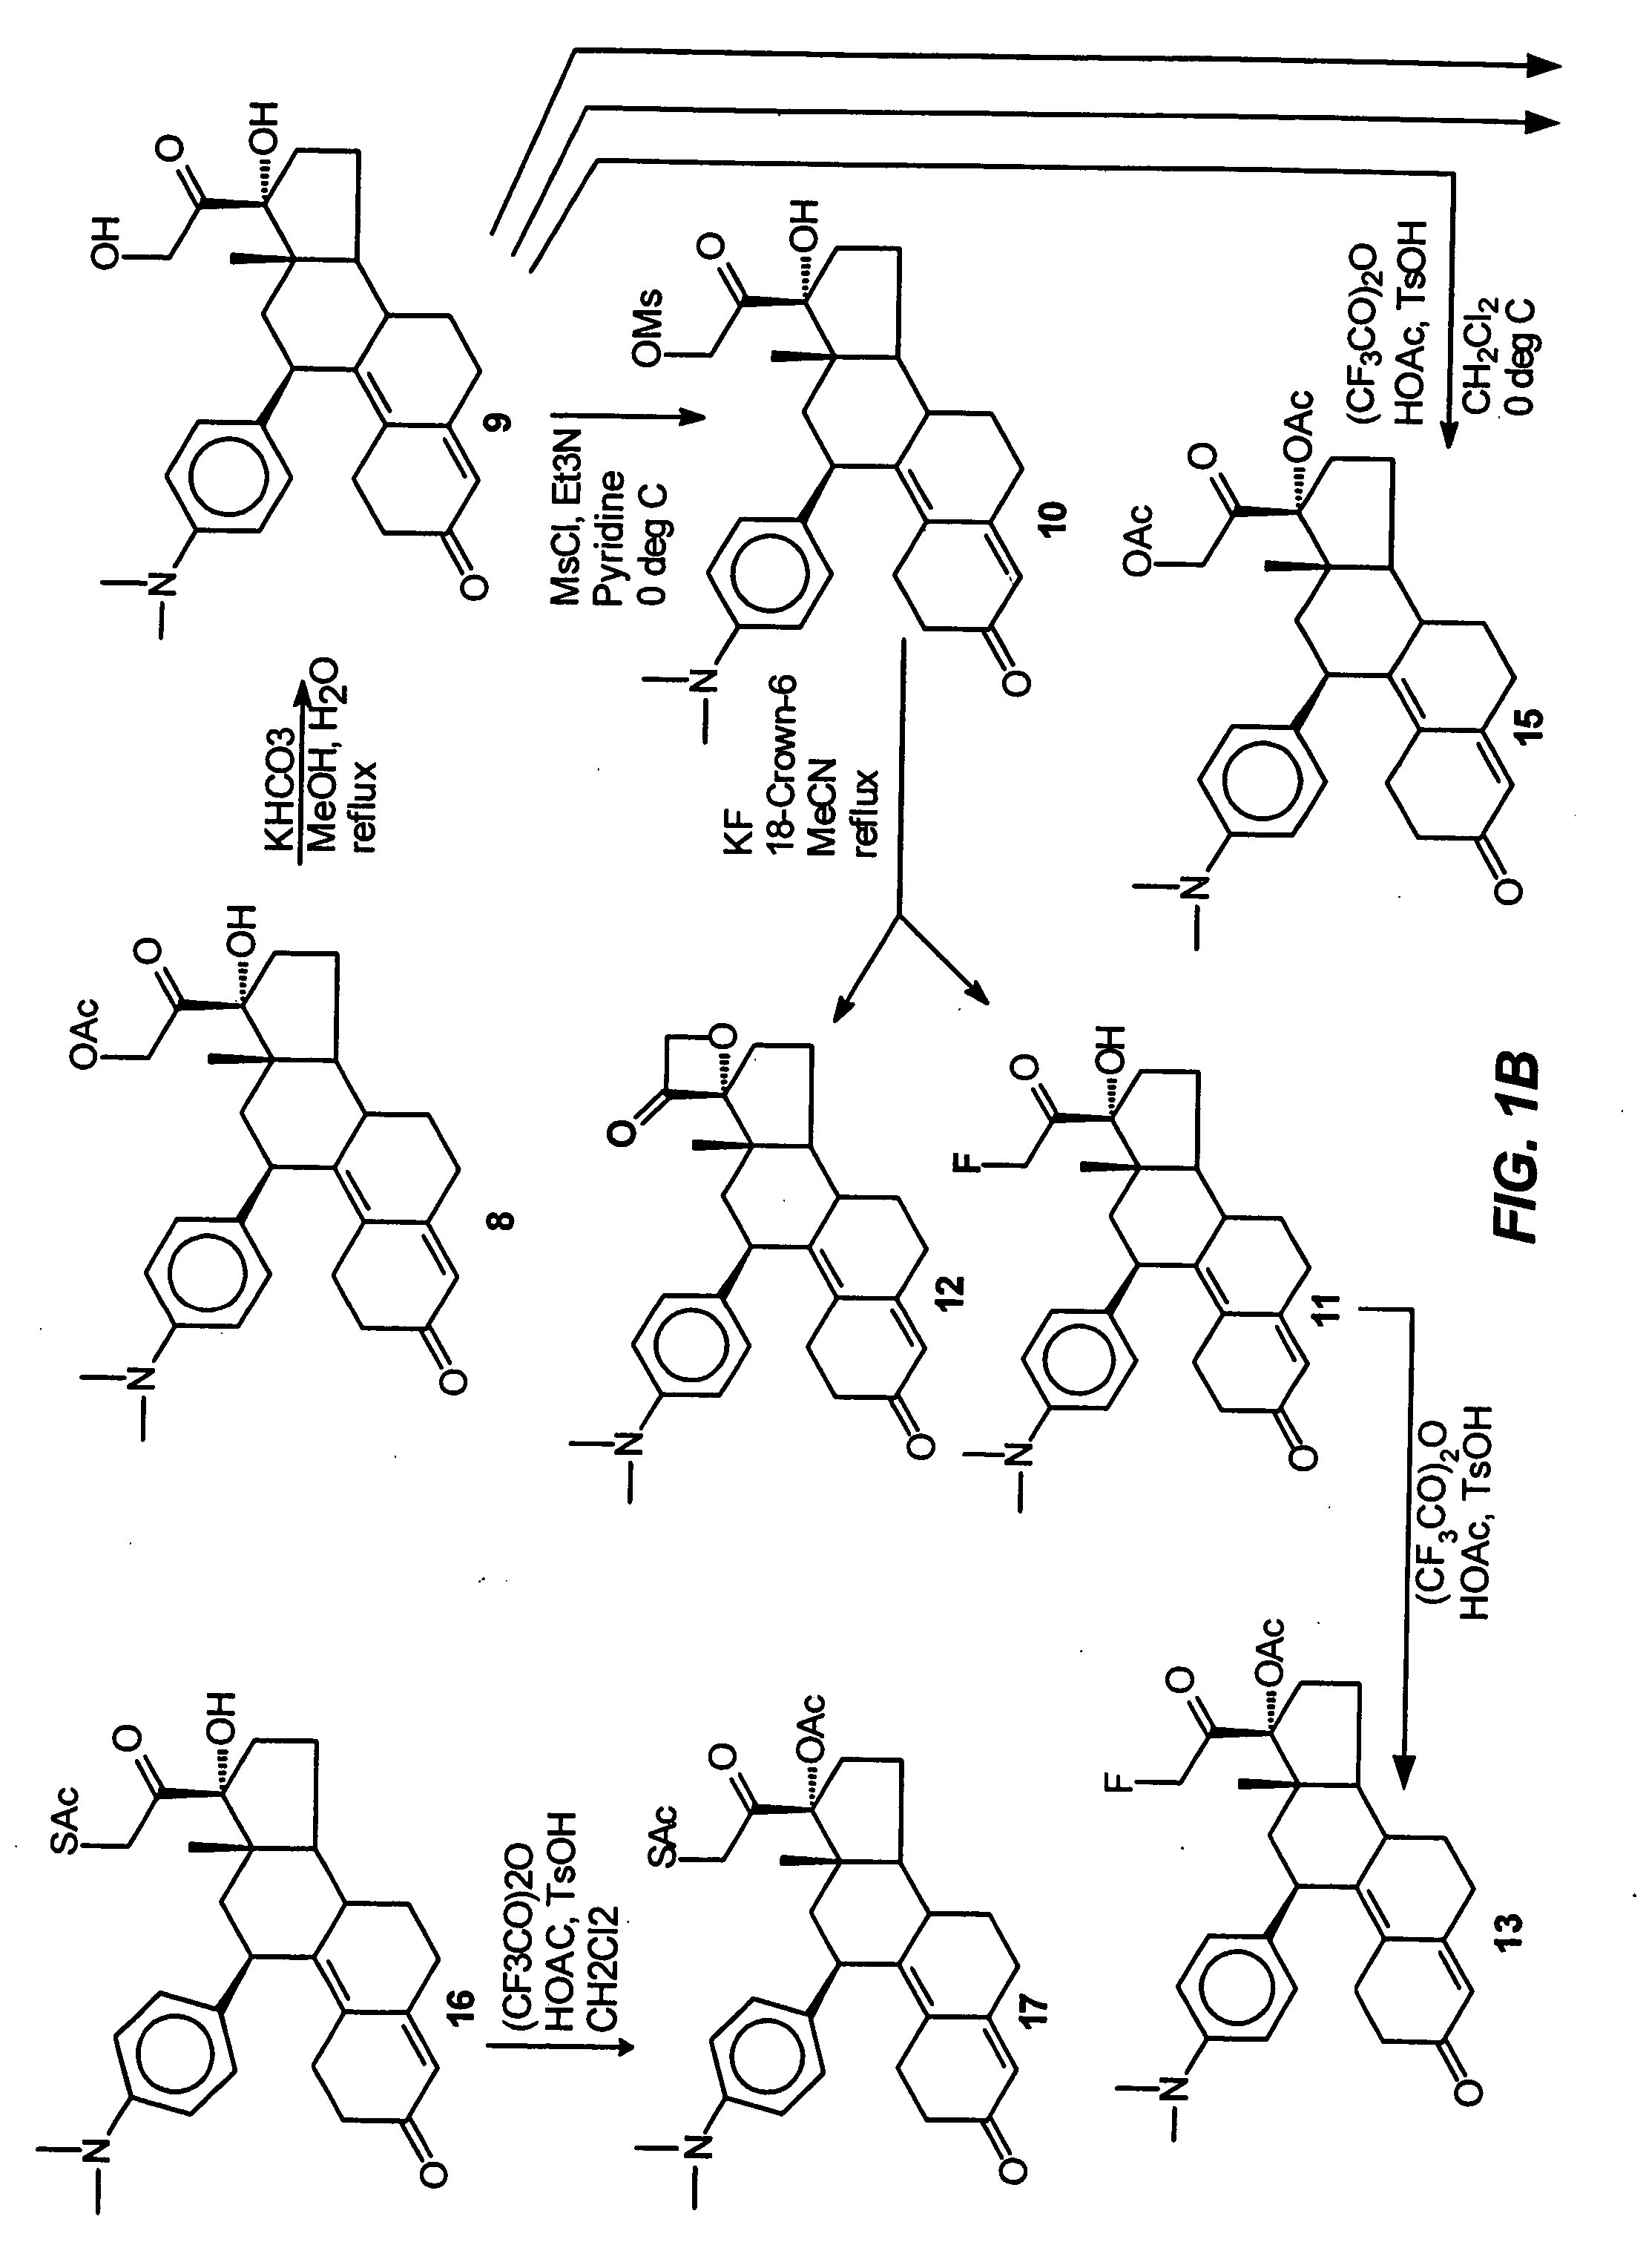 21-Substituted progesterone derivatives as new antiprogestational agents